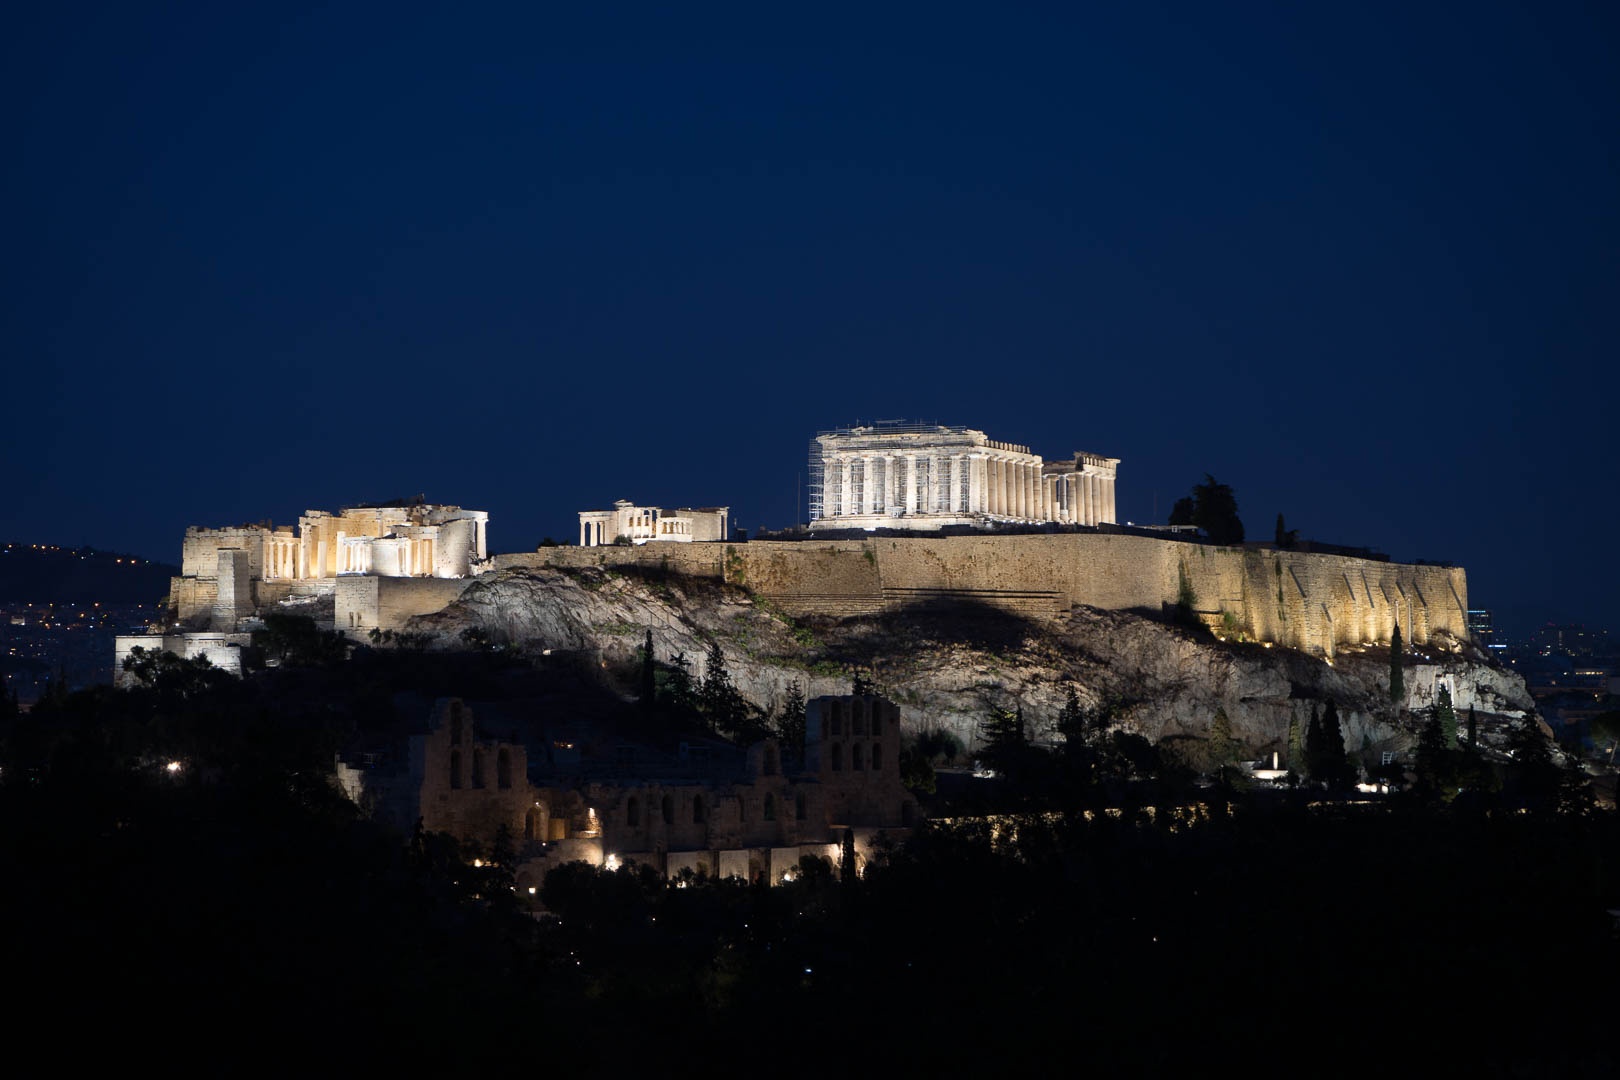 Athens, the cradle of democracy, where for a brief glimmer words were mightier than violence, at least for a lucky few.